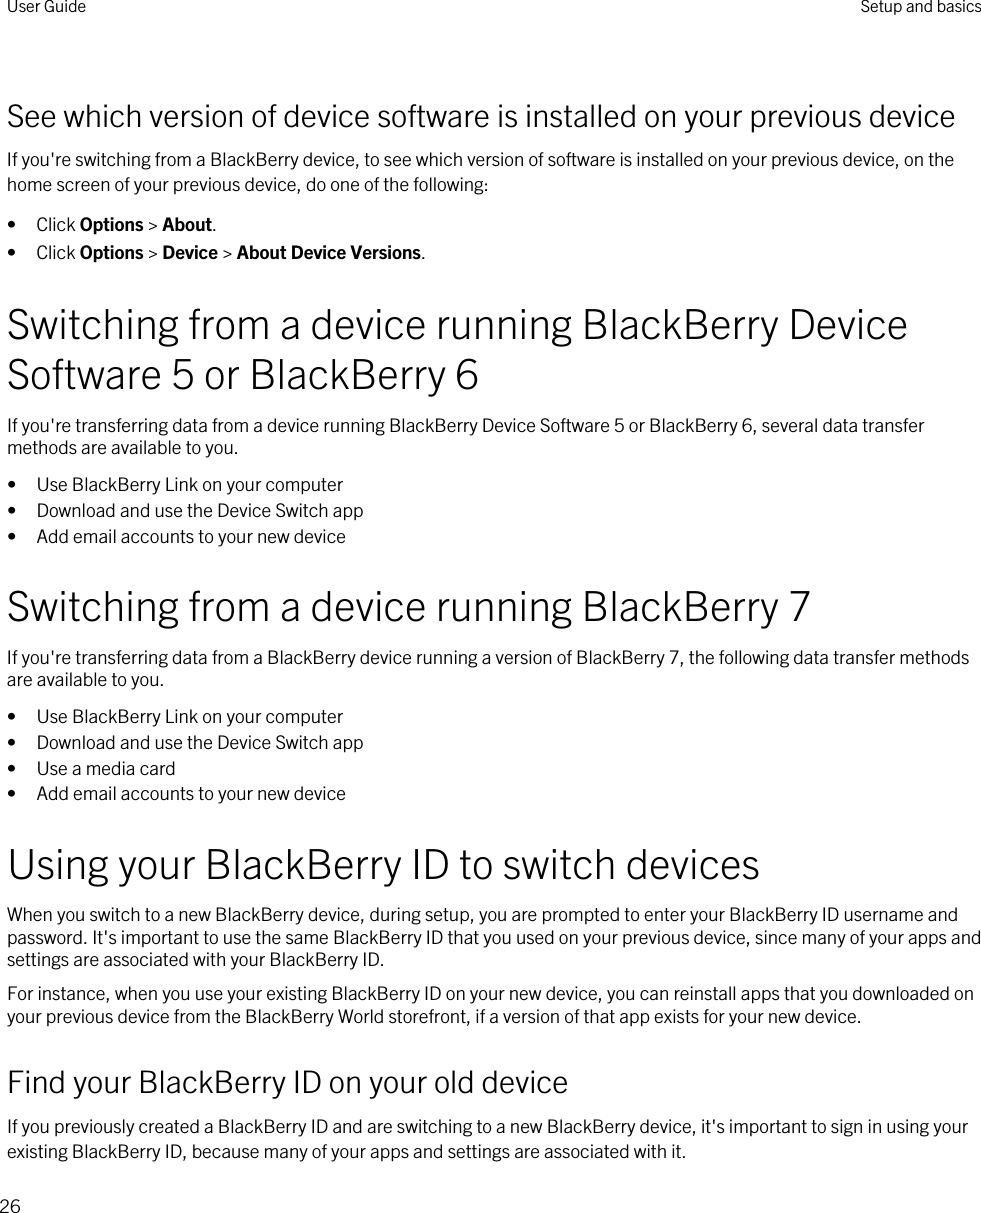 See which version of device software is installed on your previous deviceIf you&apos;re switching from a BlackBerry device, to see which version of software is installed on your previous device, on the home screen of your previous device, do one of the following:• Click Options &gt; About.• Click Options &gt; Device &gt; About Device Versions.Switching from a device running BlackBerry Device Software 5 or BlackBerry 6If you&apos;re transferring data from a device running BlackBerry Device Software 5 or BlackBerry 6, several data transfer methods are available to you.• Use BlackBerry Link on your computer• Download and use the Device Switch app• Add email accounts to your new deviceSwitching from a device running BlackBerry 7If you&apos;re transferring data from a BlackBerry device running a version of BlackBerry 7, the following data transfer methods are available to you.• Use BlackBerry Link on your computer• Download and use the Device Switch app• Use a media card• Add email accounts to your new deviceUsing your BlackBerry ID to switch devicesWhen you switch to a new BlackBerry device, during setup, you are prompted to enter your BlackBerry ID username and password. It&apos;s important to use the same BlackBerry ID that you used on your previous device, since many of your apps and settings are associated with your BlackBerry ID.For instance, when you use your existing BlackBerry ID on your new device, you can reinstall apps that you downloaded on your previous device from the BlackBerry World storefront, if a version of that app exists for your new device.Find your BlackBerry ID on your old deviceIf you previously created a BlackBerry ID and are switching to a new BlackBerry device, it&apos;s important to sign in using your existing BlackBerry ID, because many of your apps and settings are associated with it.User Guide Setup and basics26